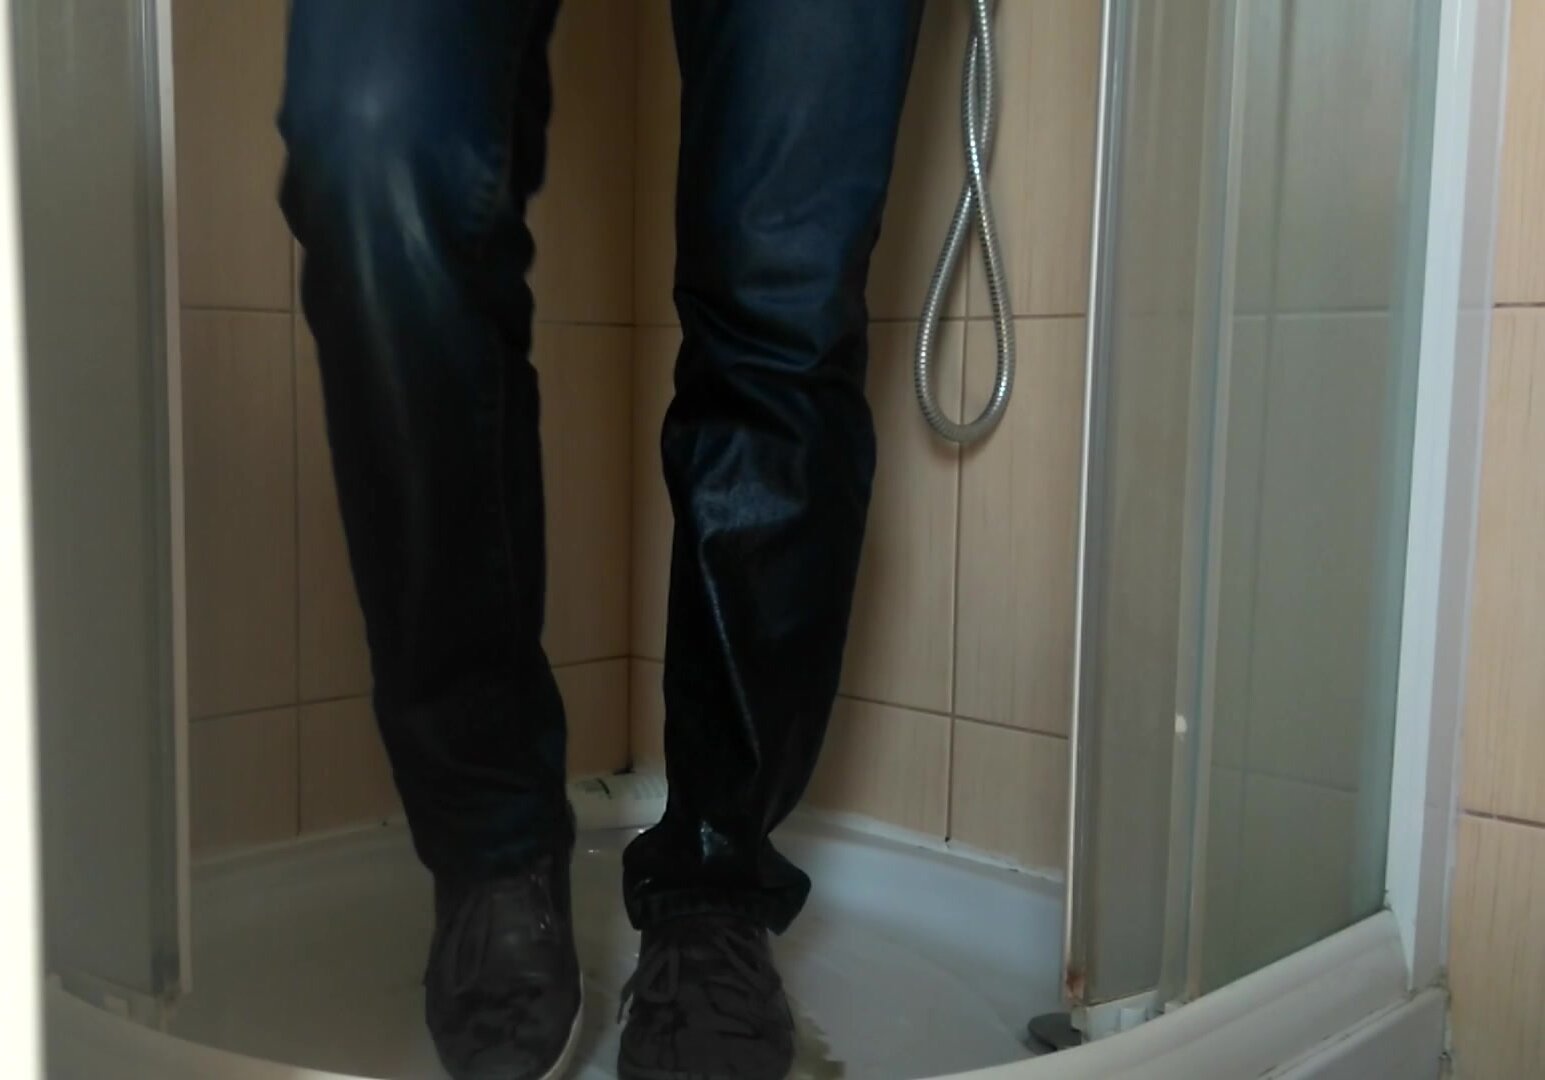 Rewetting and showering in jeans and shoes 2016